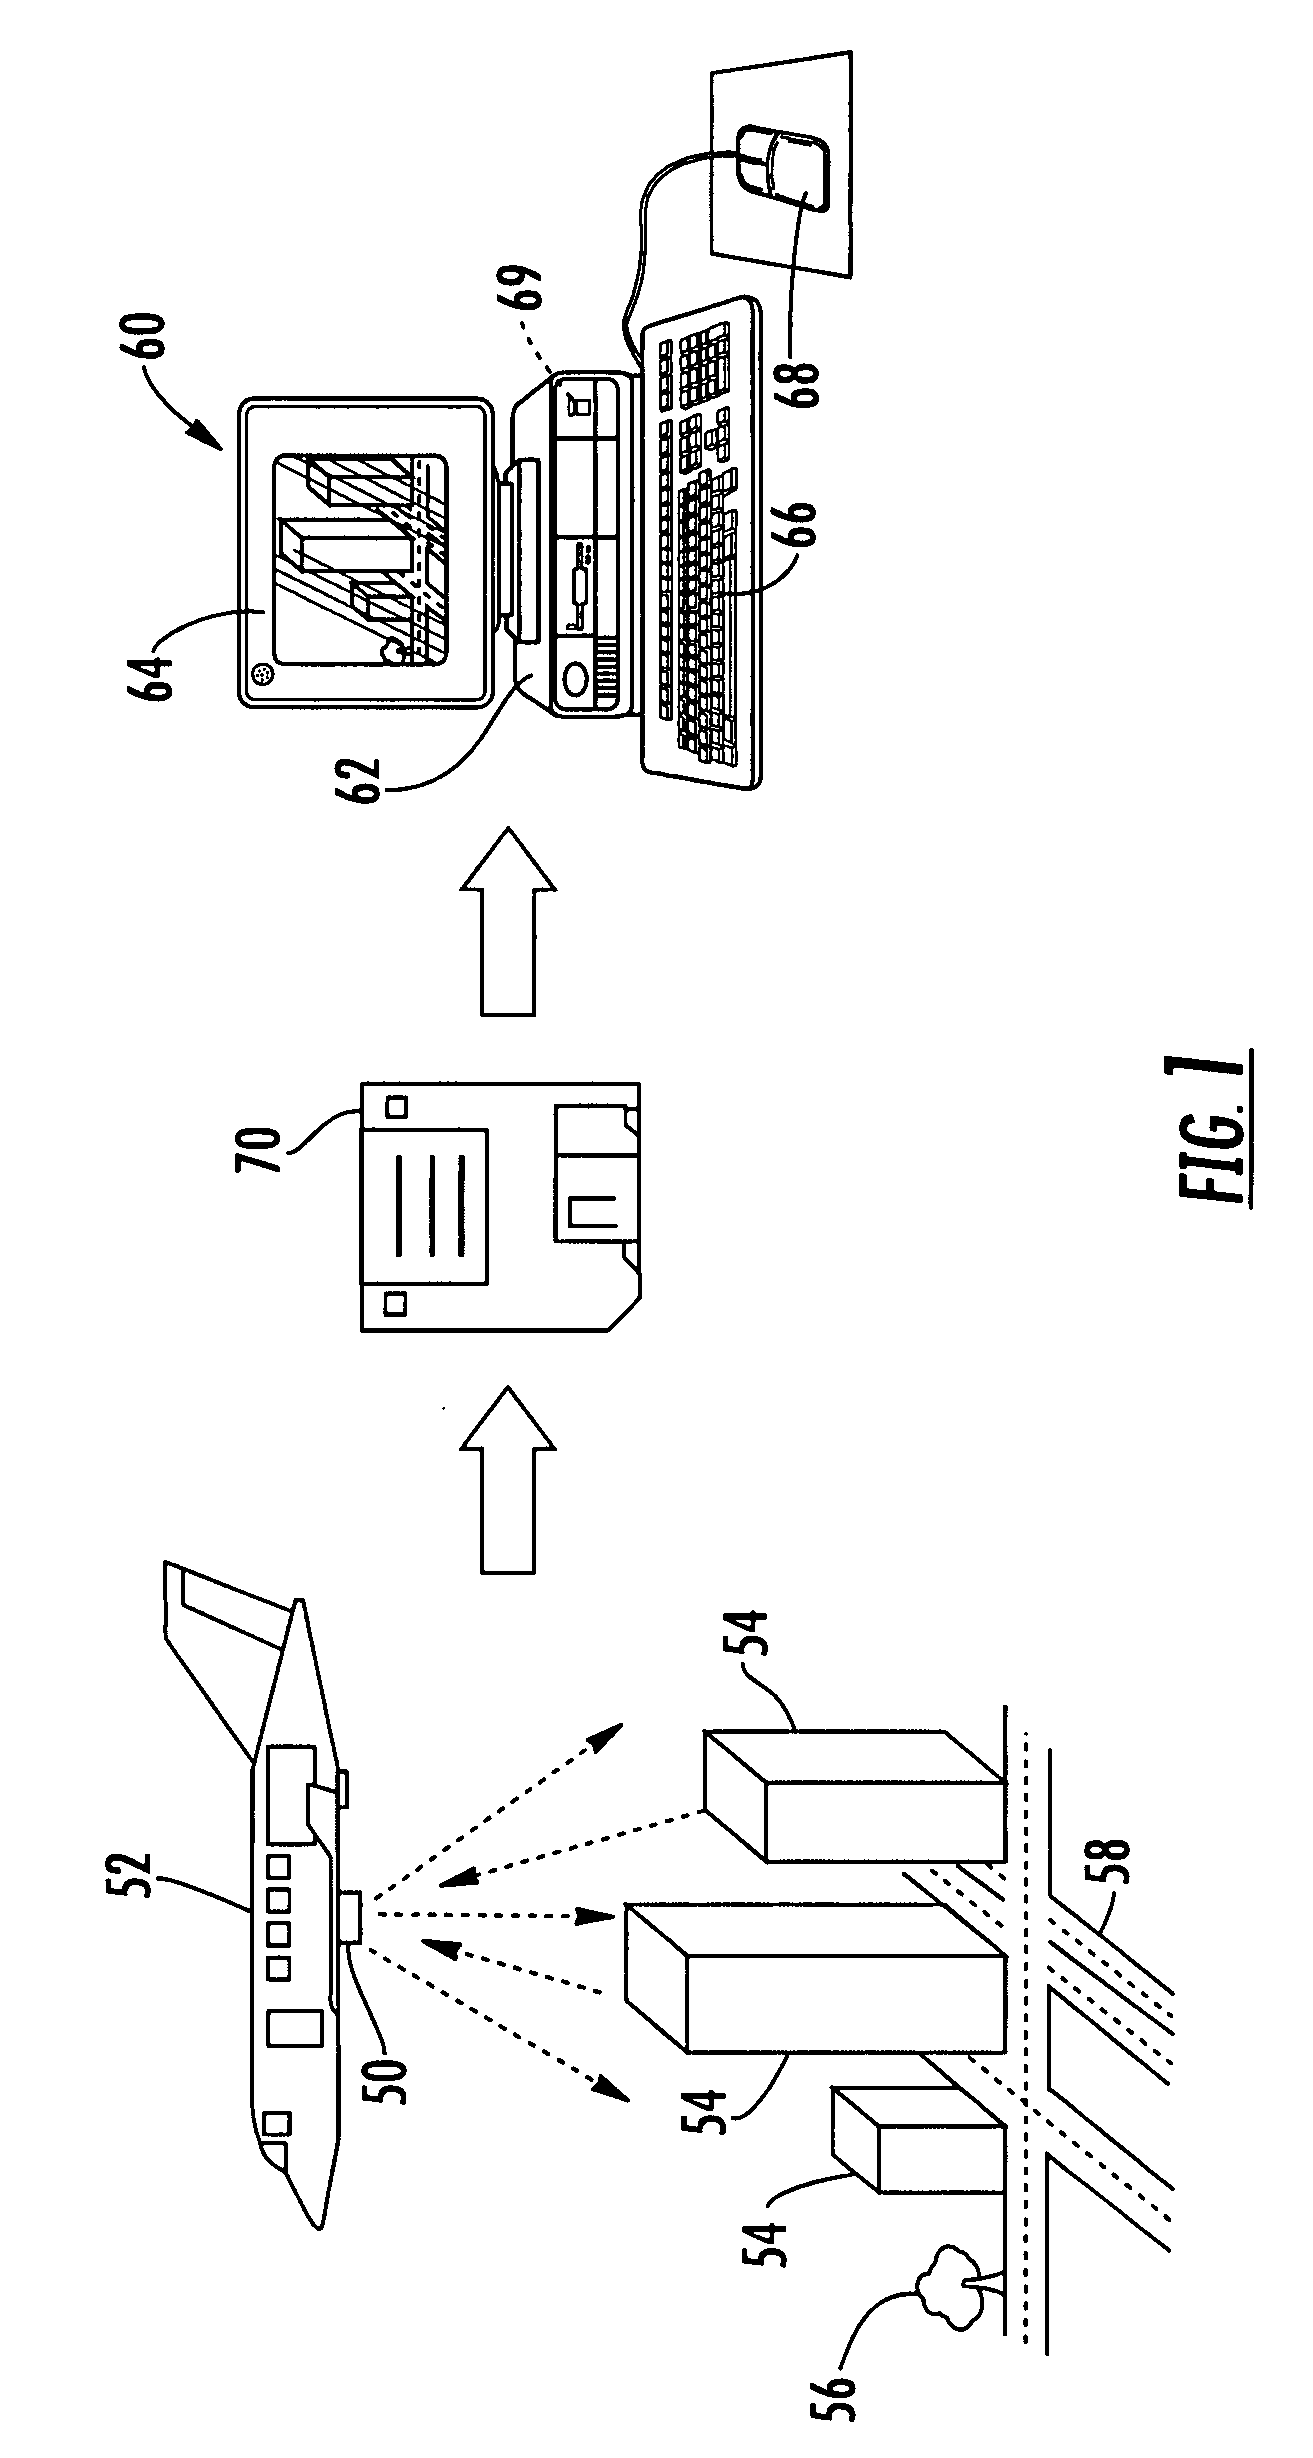 Method and apparatus for processing SAR images based on a complex anisotropic diffusion filtering algorithm